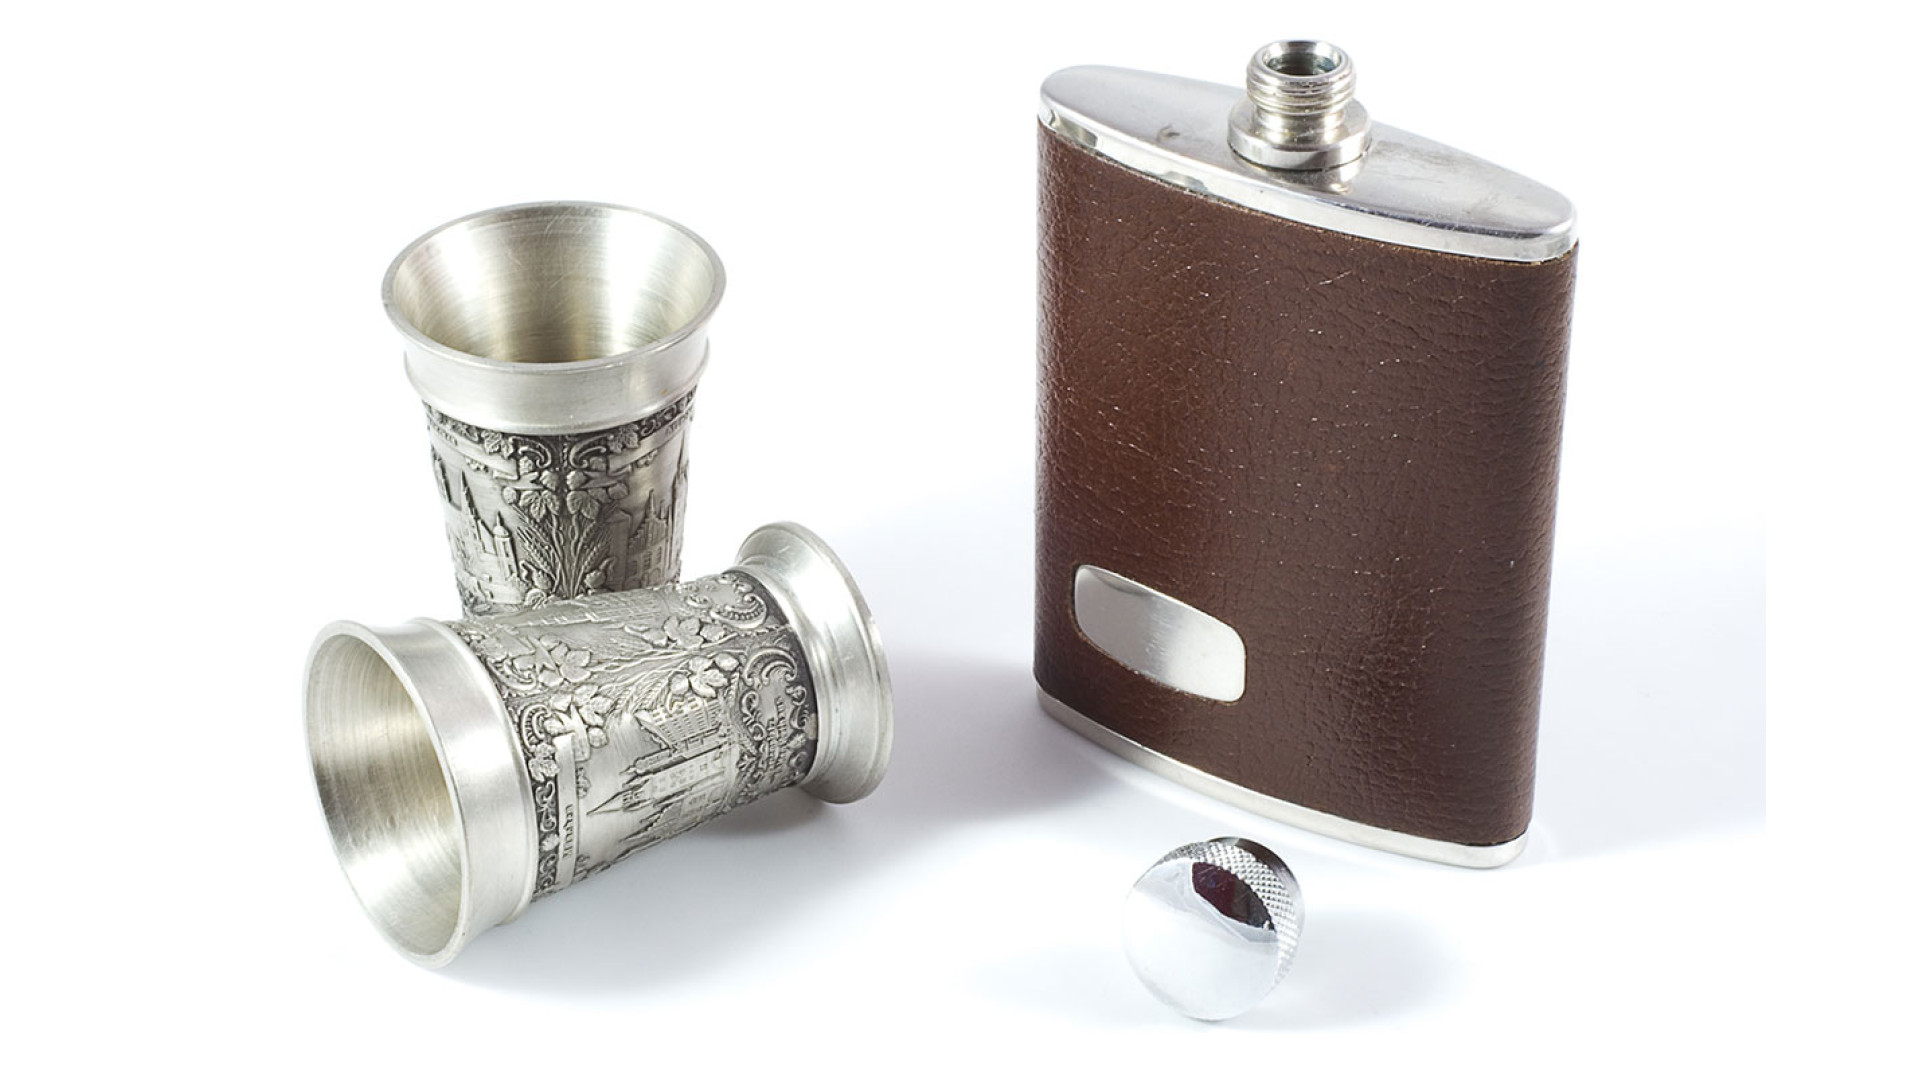 https://www.ckbproducts.com/image/cache/catalog/CKBn/should-you-use-hip-flasks-at-home-1920x1080.jpg